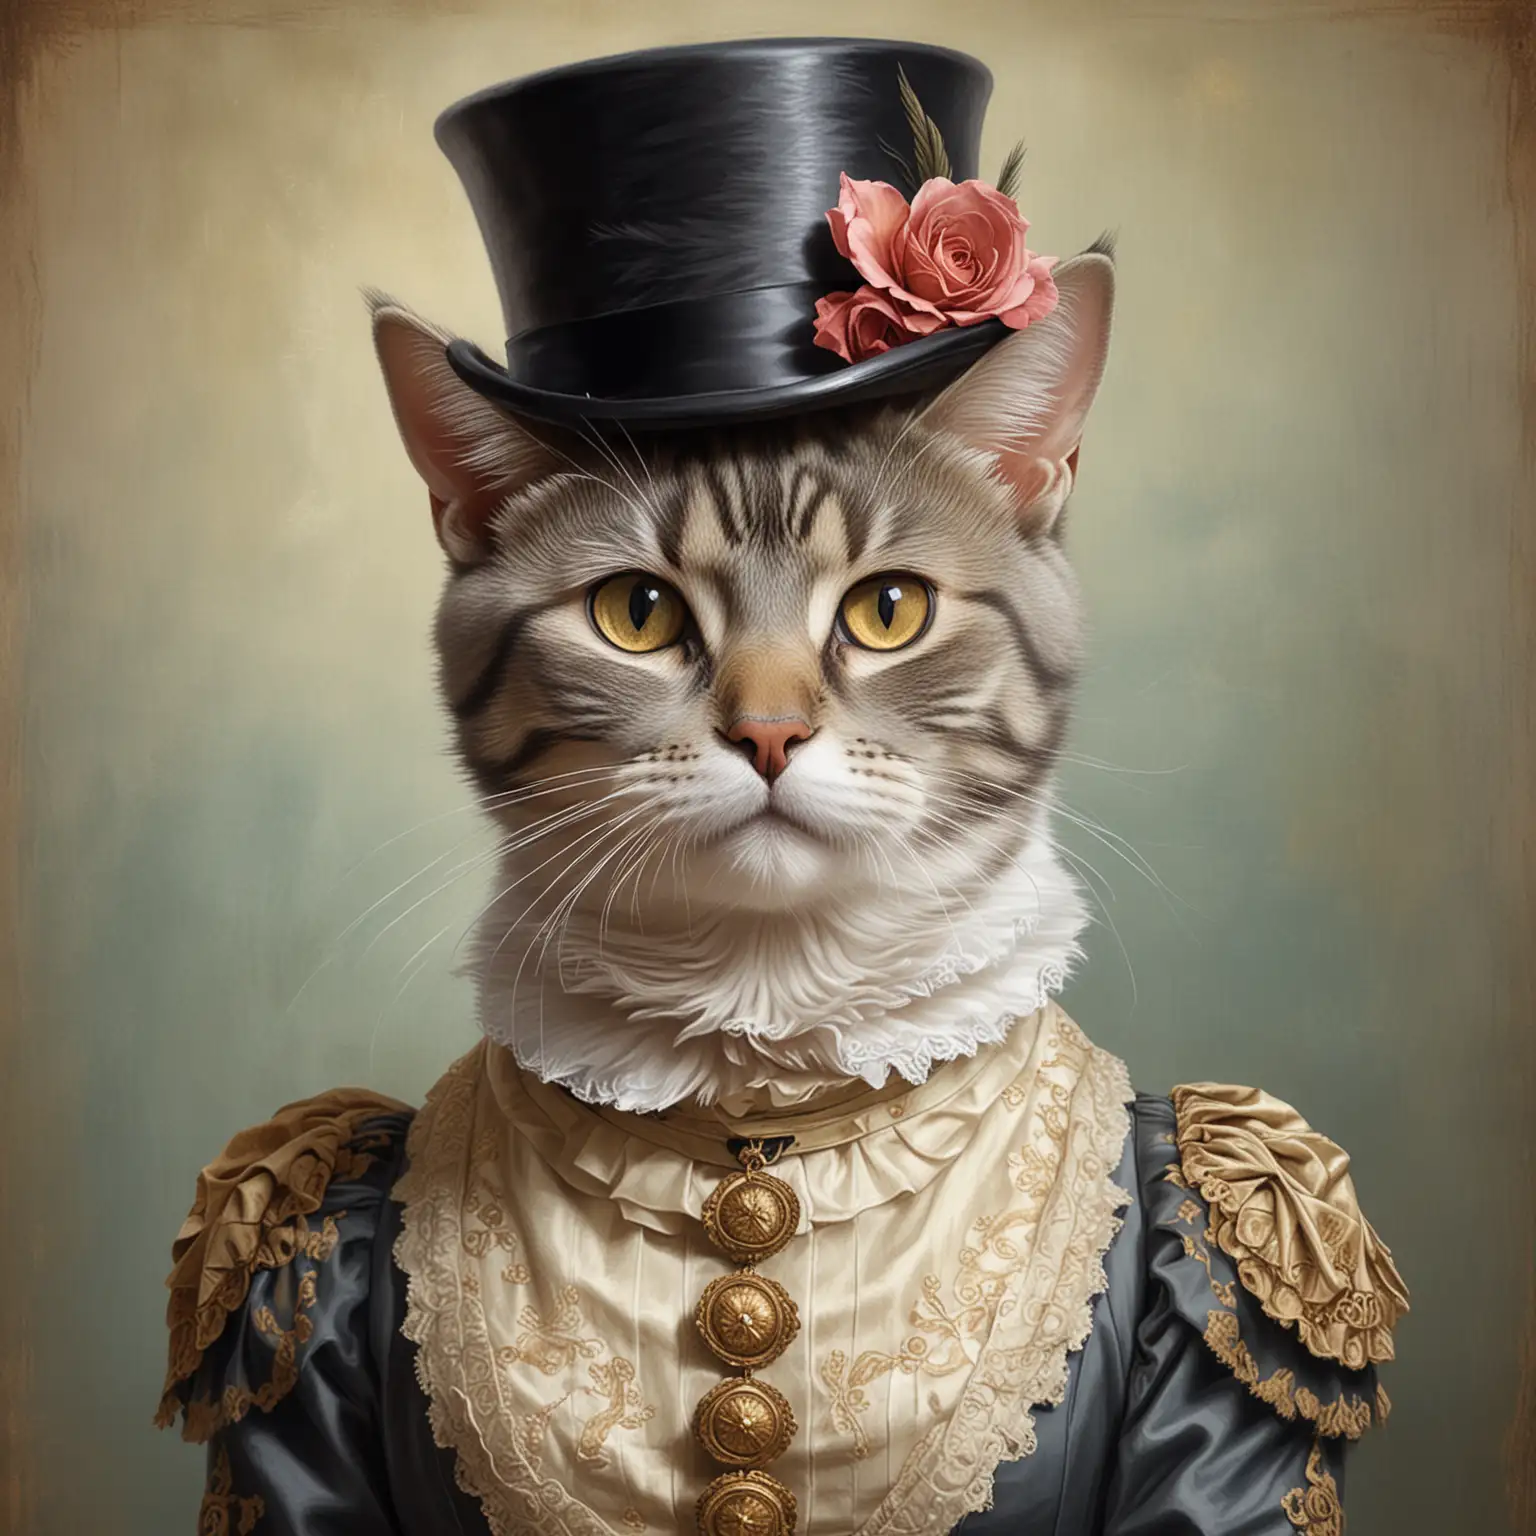 Victorian Style Portrait ShortHaired Scottish Cat in Ornate Female Clothing and Top Hat